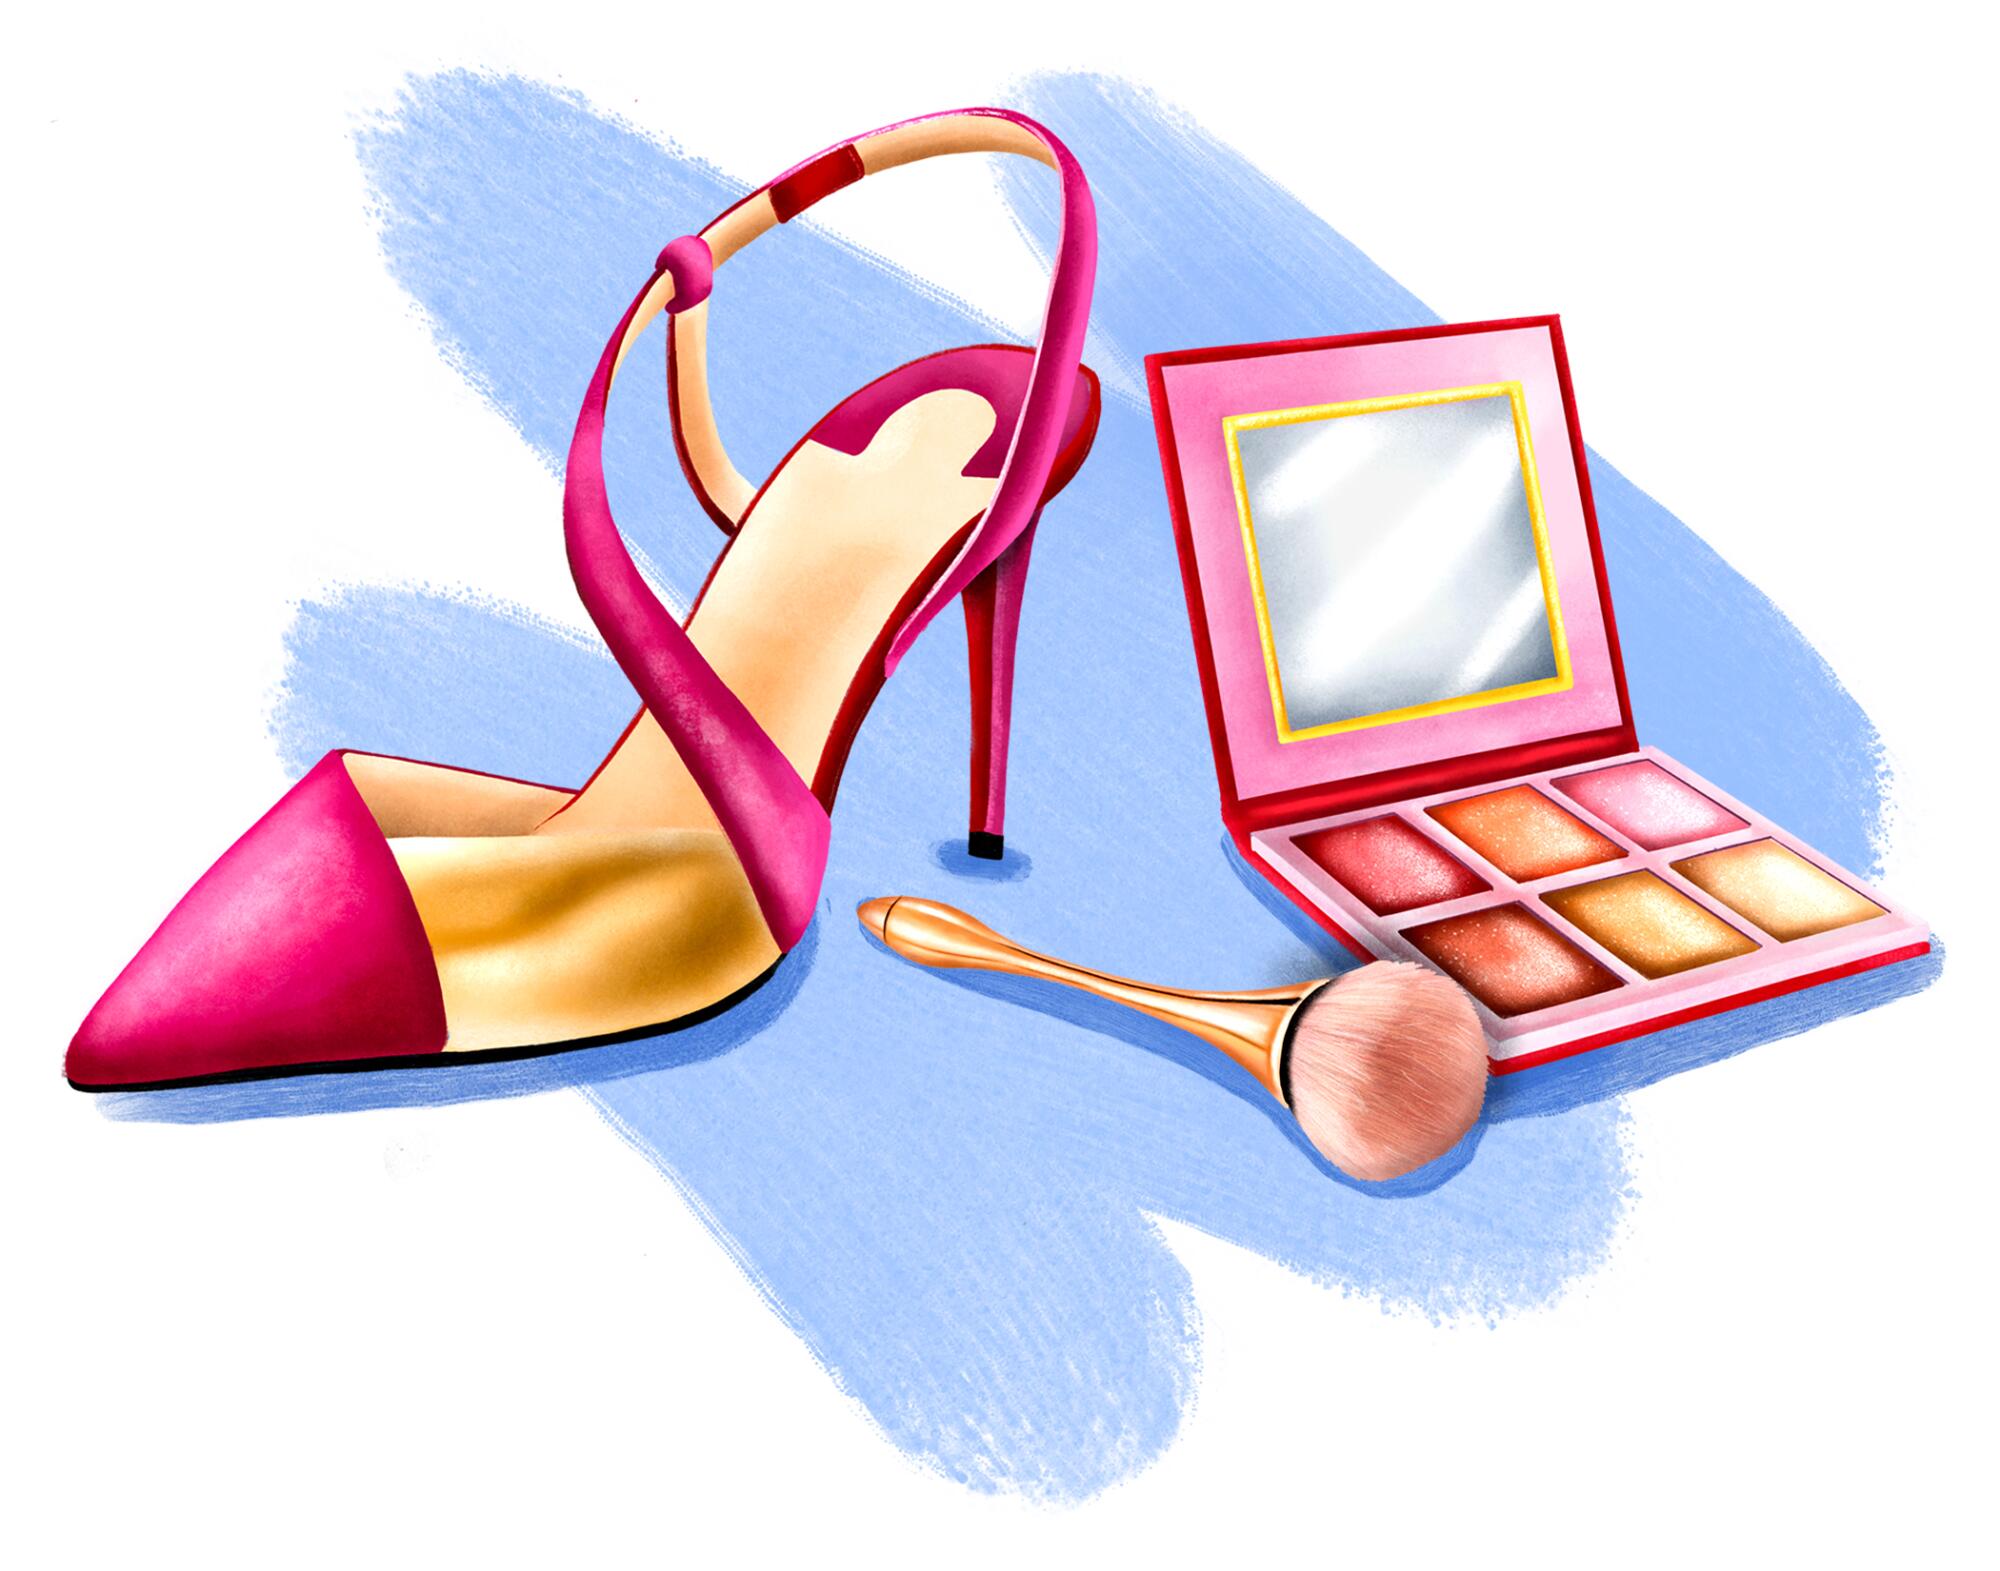 Illustration of makeup and heels